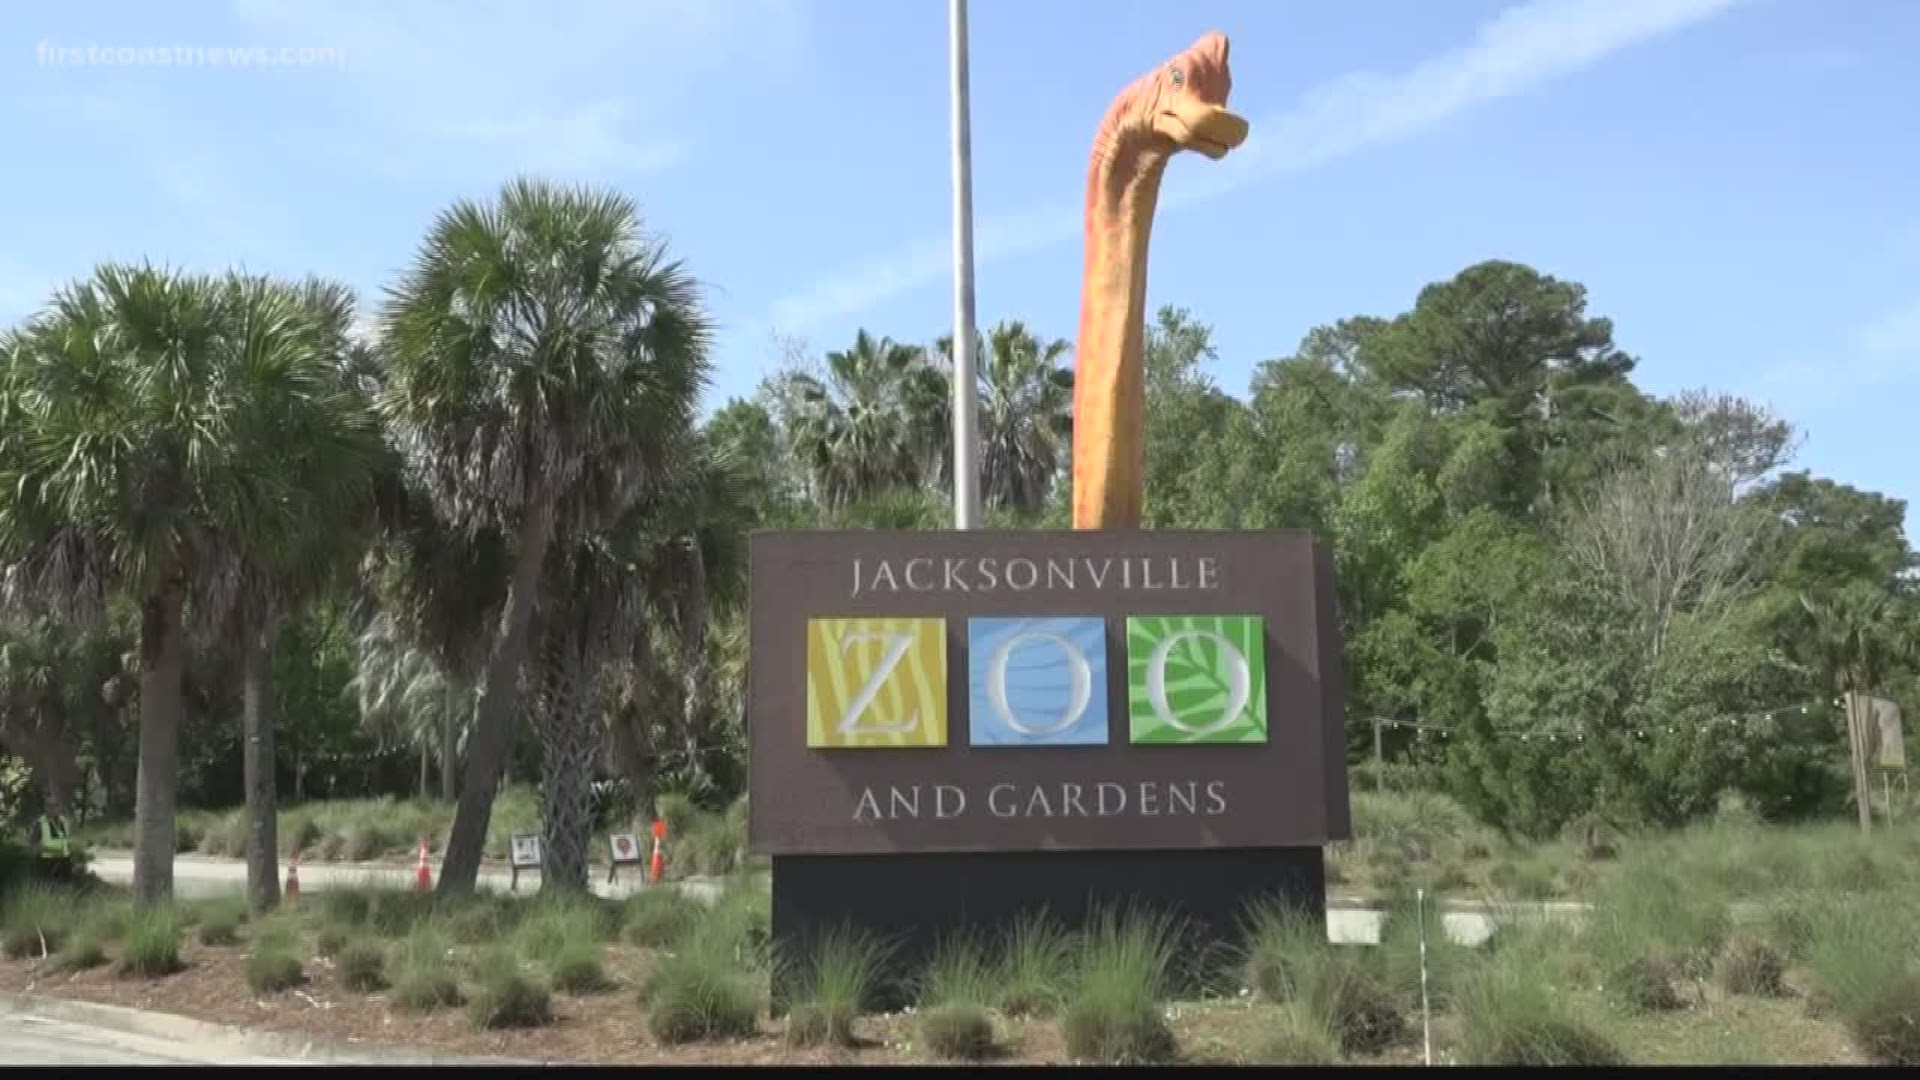 Zookeepers are continuing to care for the animals inside the Jacksonville Zoo and Gardens amid the coronavirus pandemic.